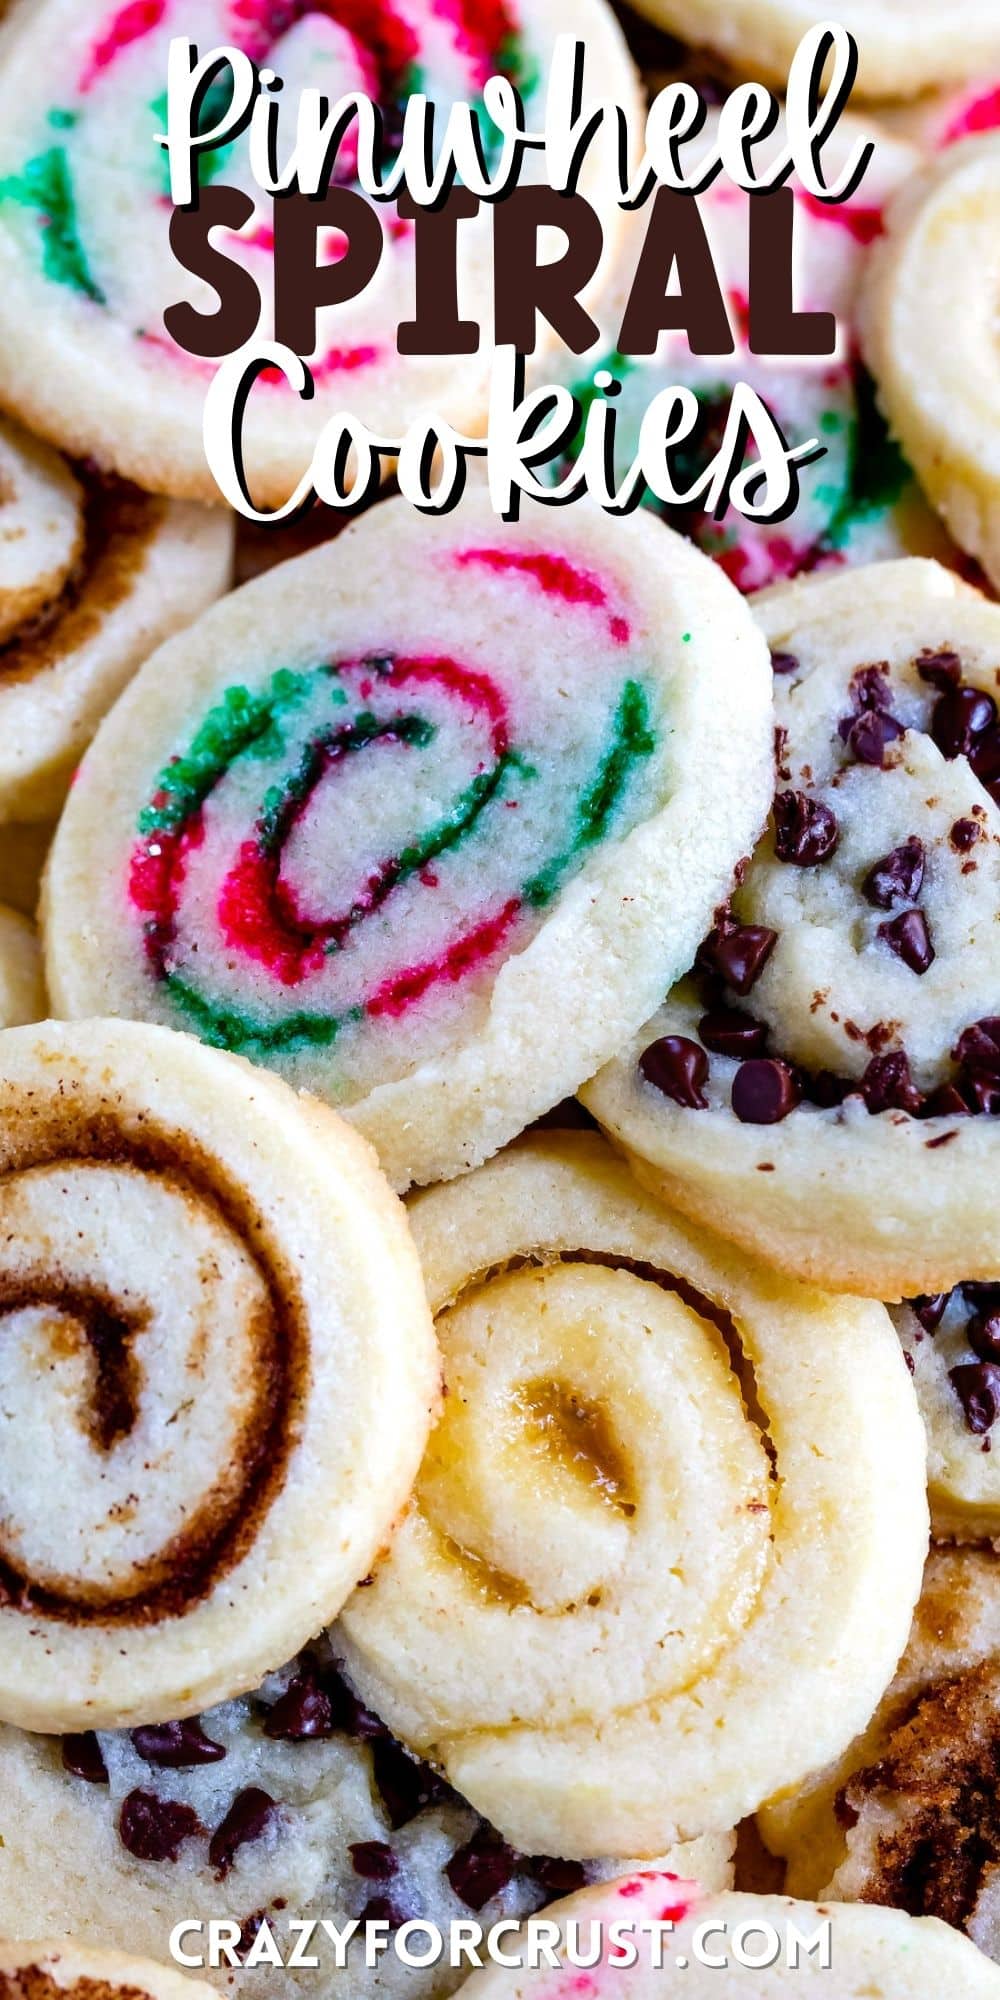 all types of swirl cookies mixed together with words on top of the image